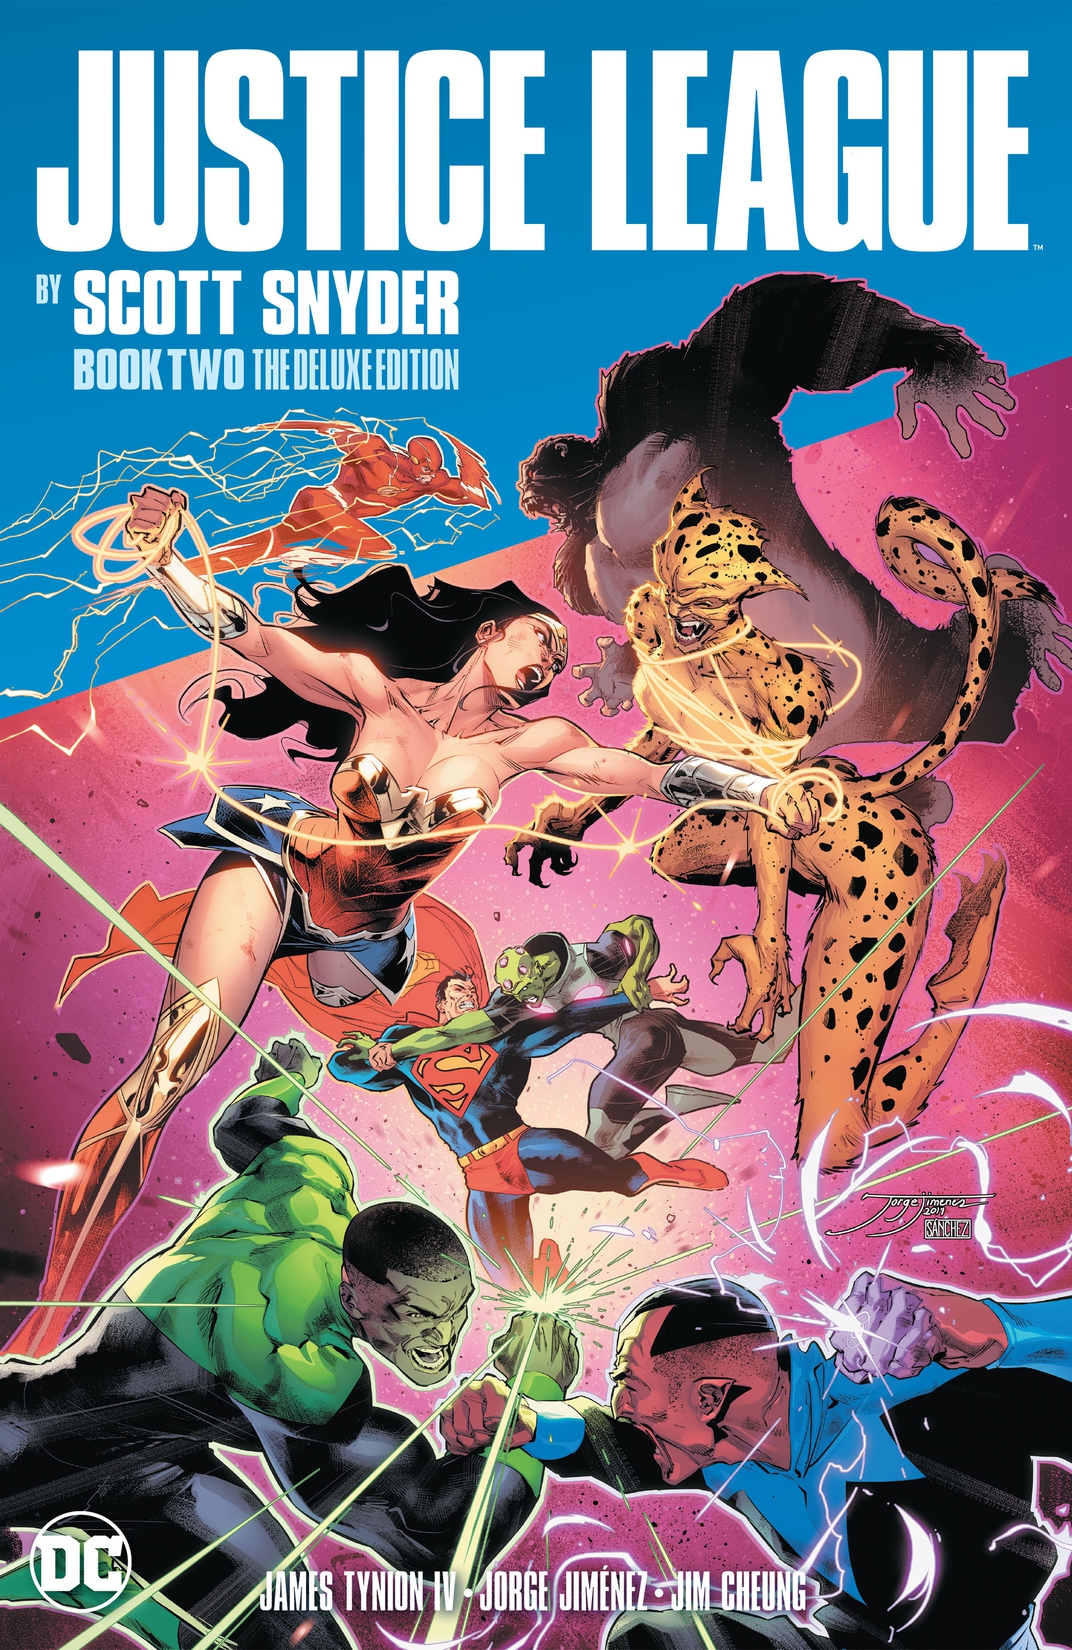 Jim Cheung and Jorge Jiménez to Join Scott Snyder's “Justice